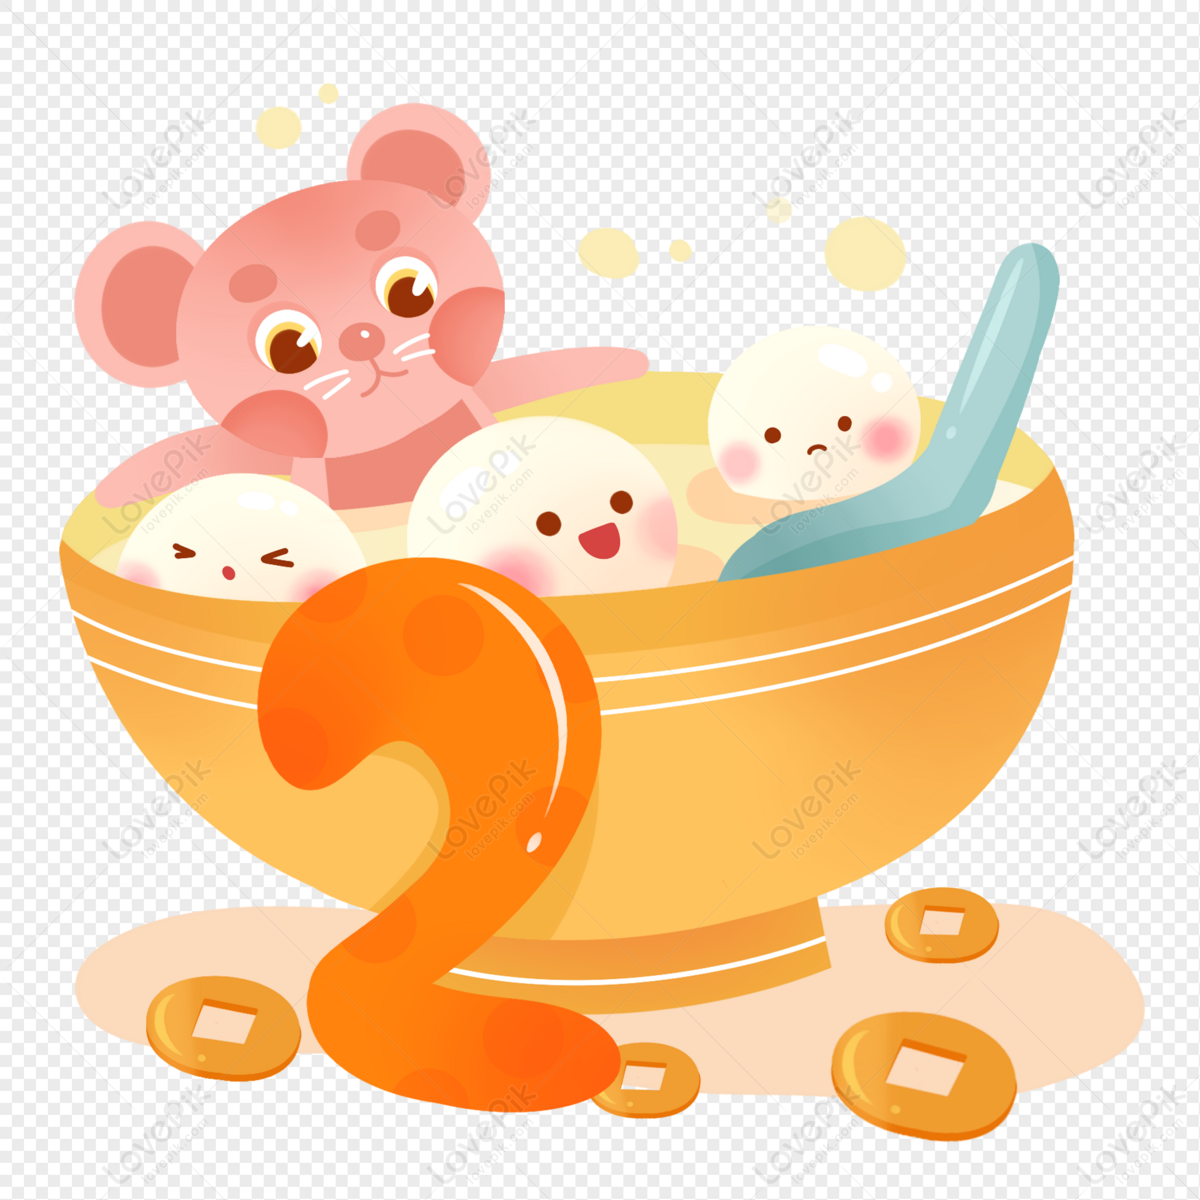 February 2020 Rat Year Cartoon Rat PNG White Transparent And Clipart Image  For Free Download - Lovepik | 401663222